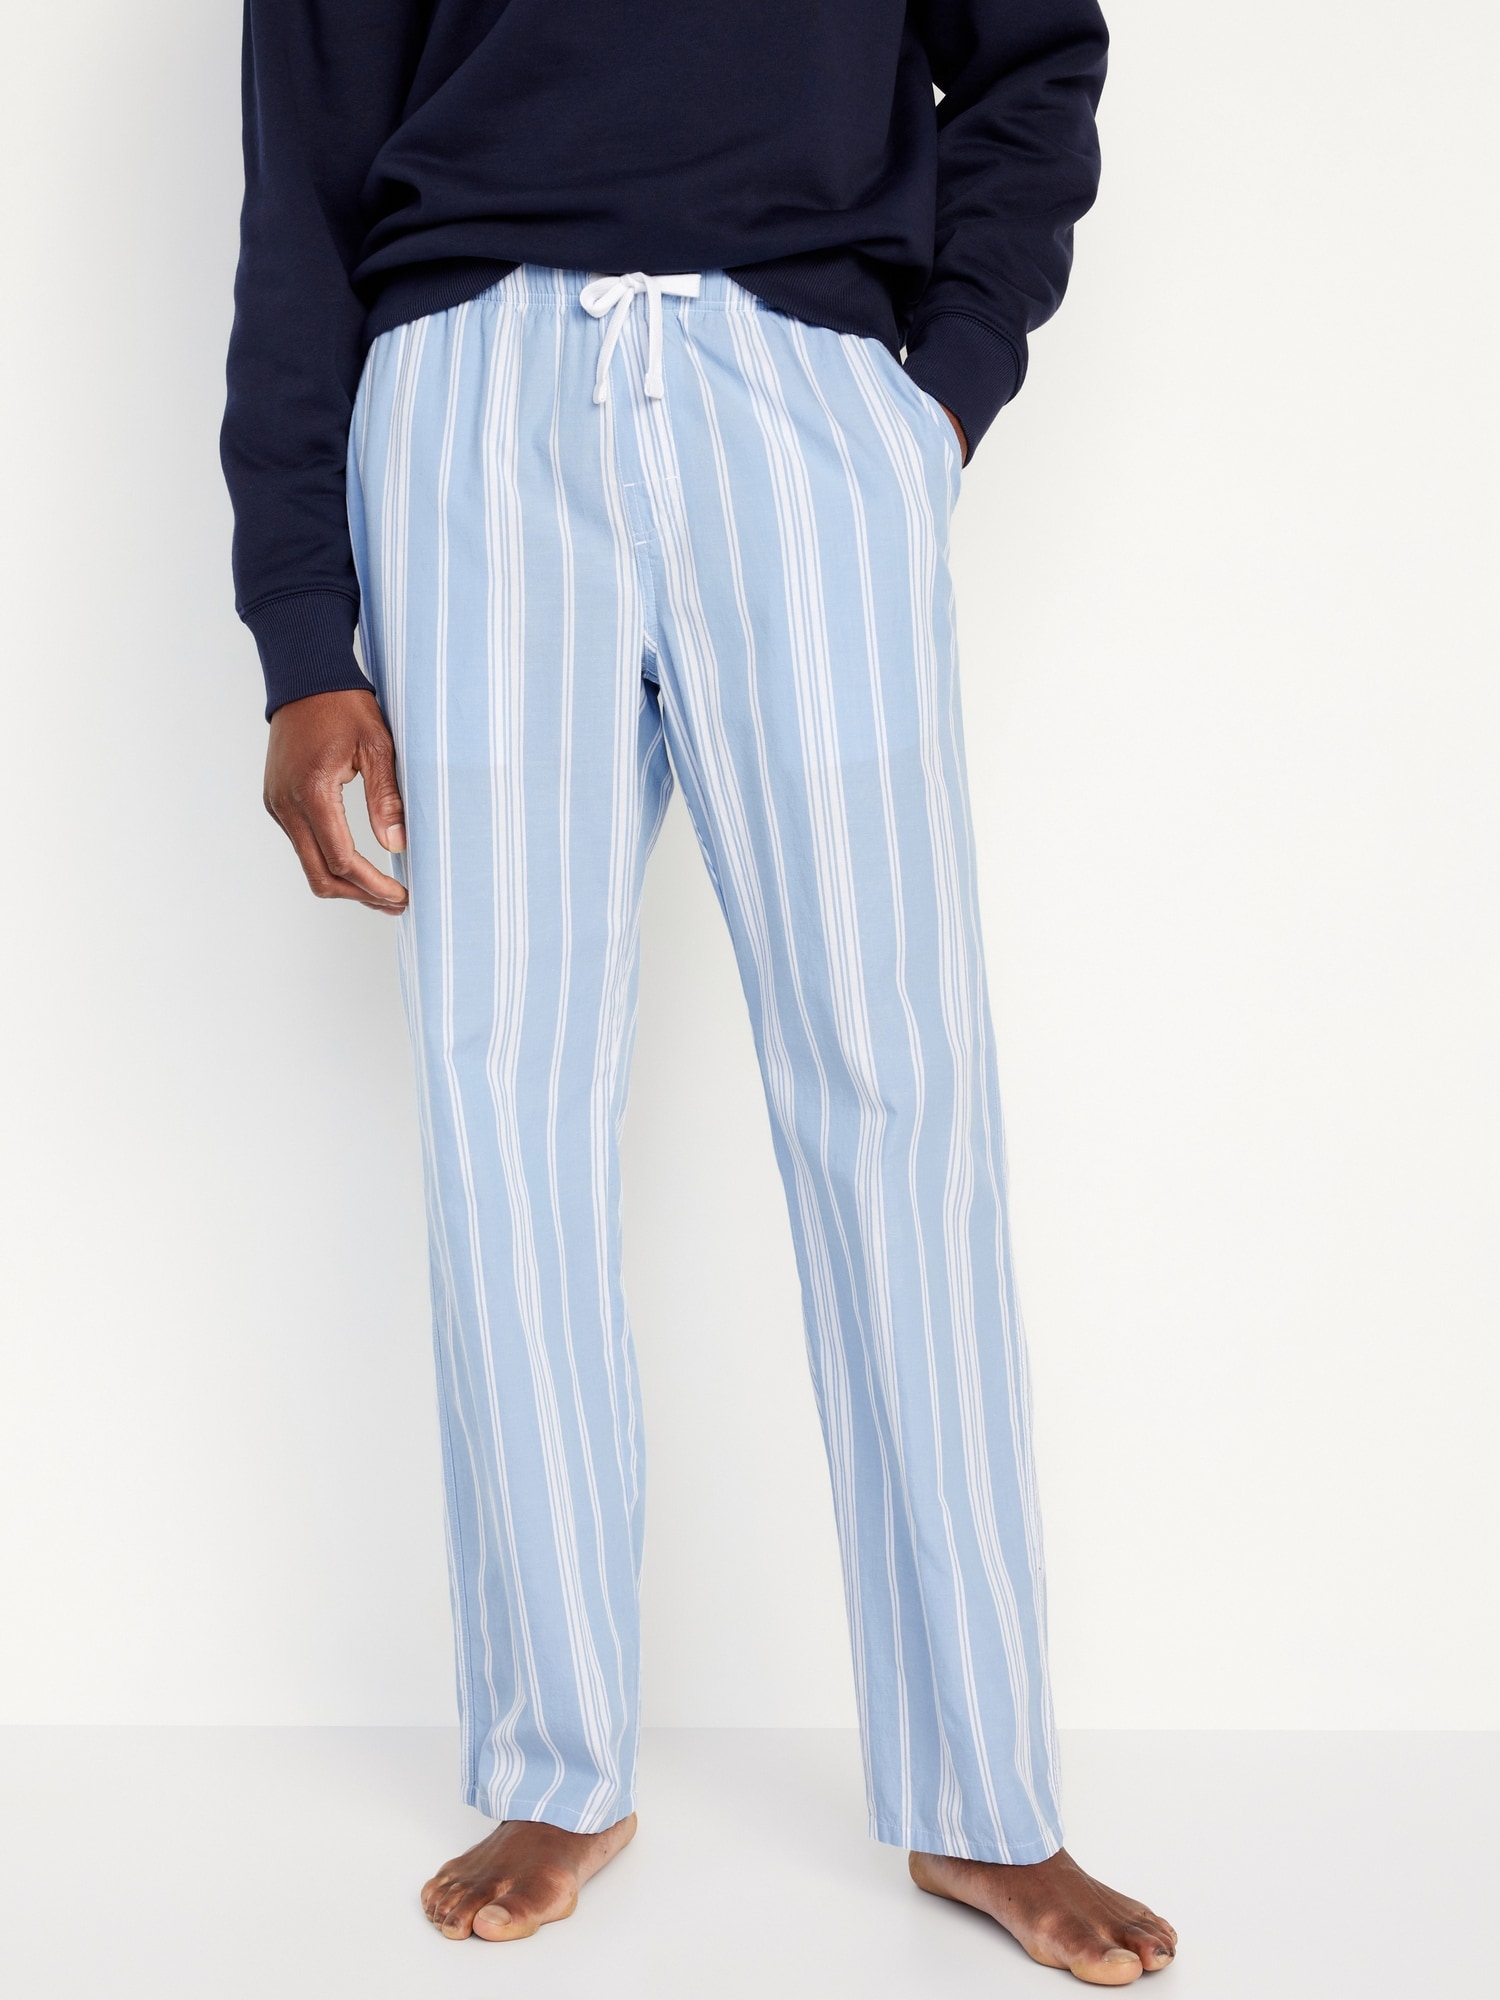 Old Navy Pajama Pants for the Family from $4 (Regularly up to $24.99)